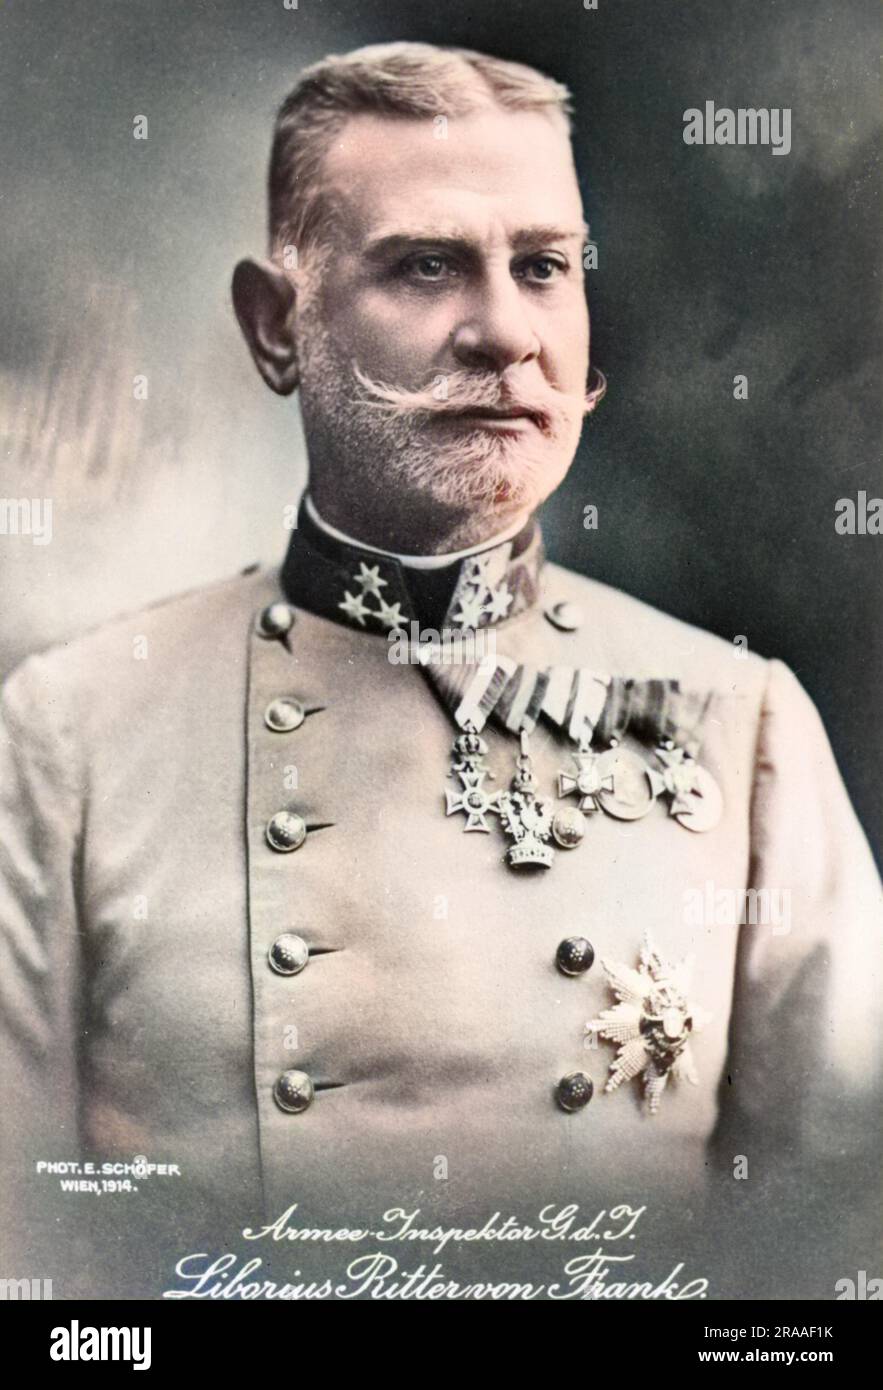 Liborius Ritter von Frank (1848-19??), Austro-Hungarian General during the First World War, Commander of the Austrian 5th Army in 1914.     Date: circa 1914 Stock Photo